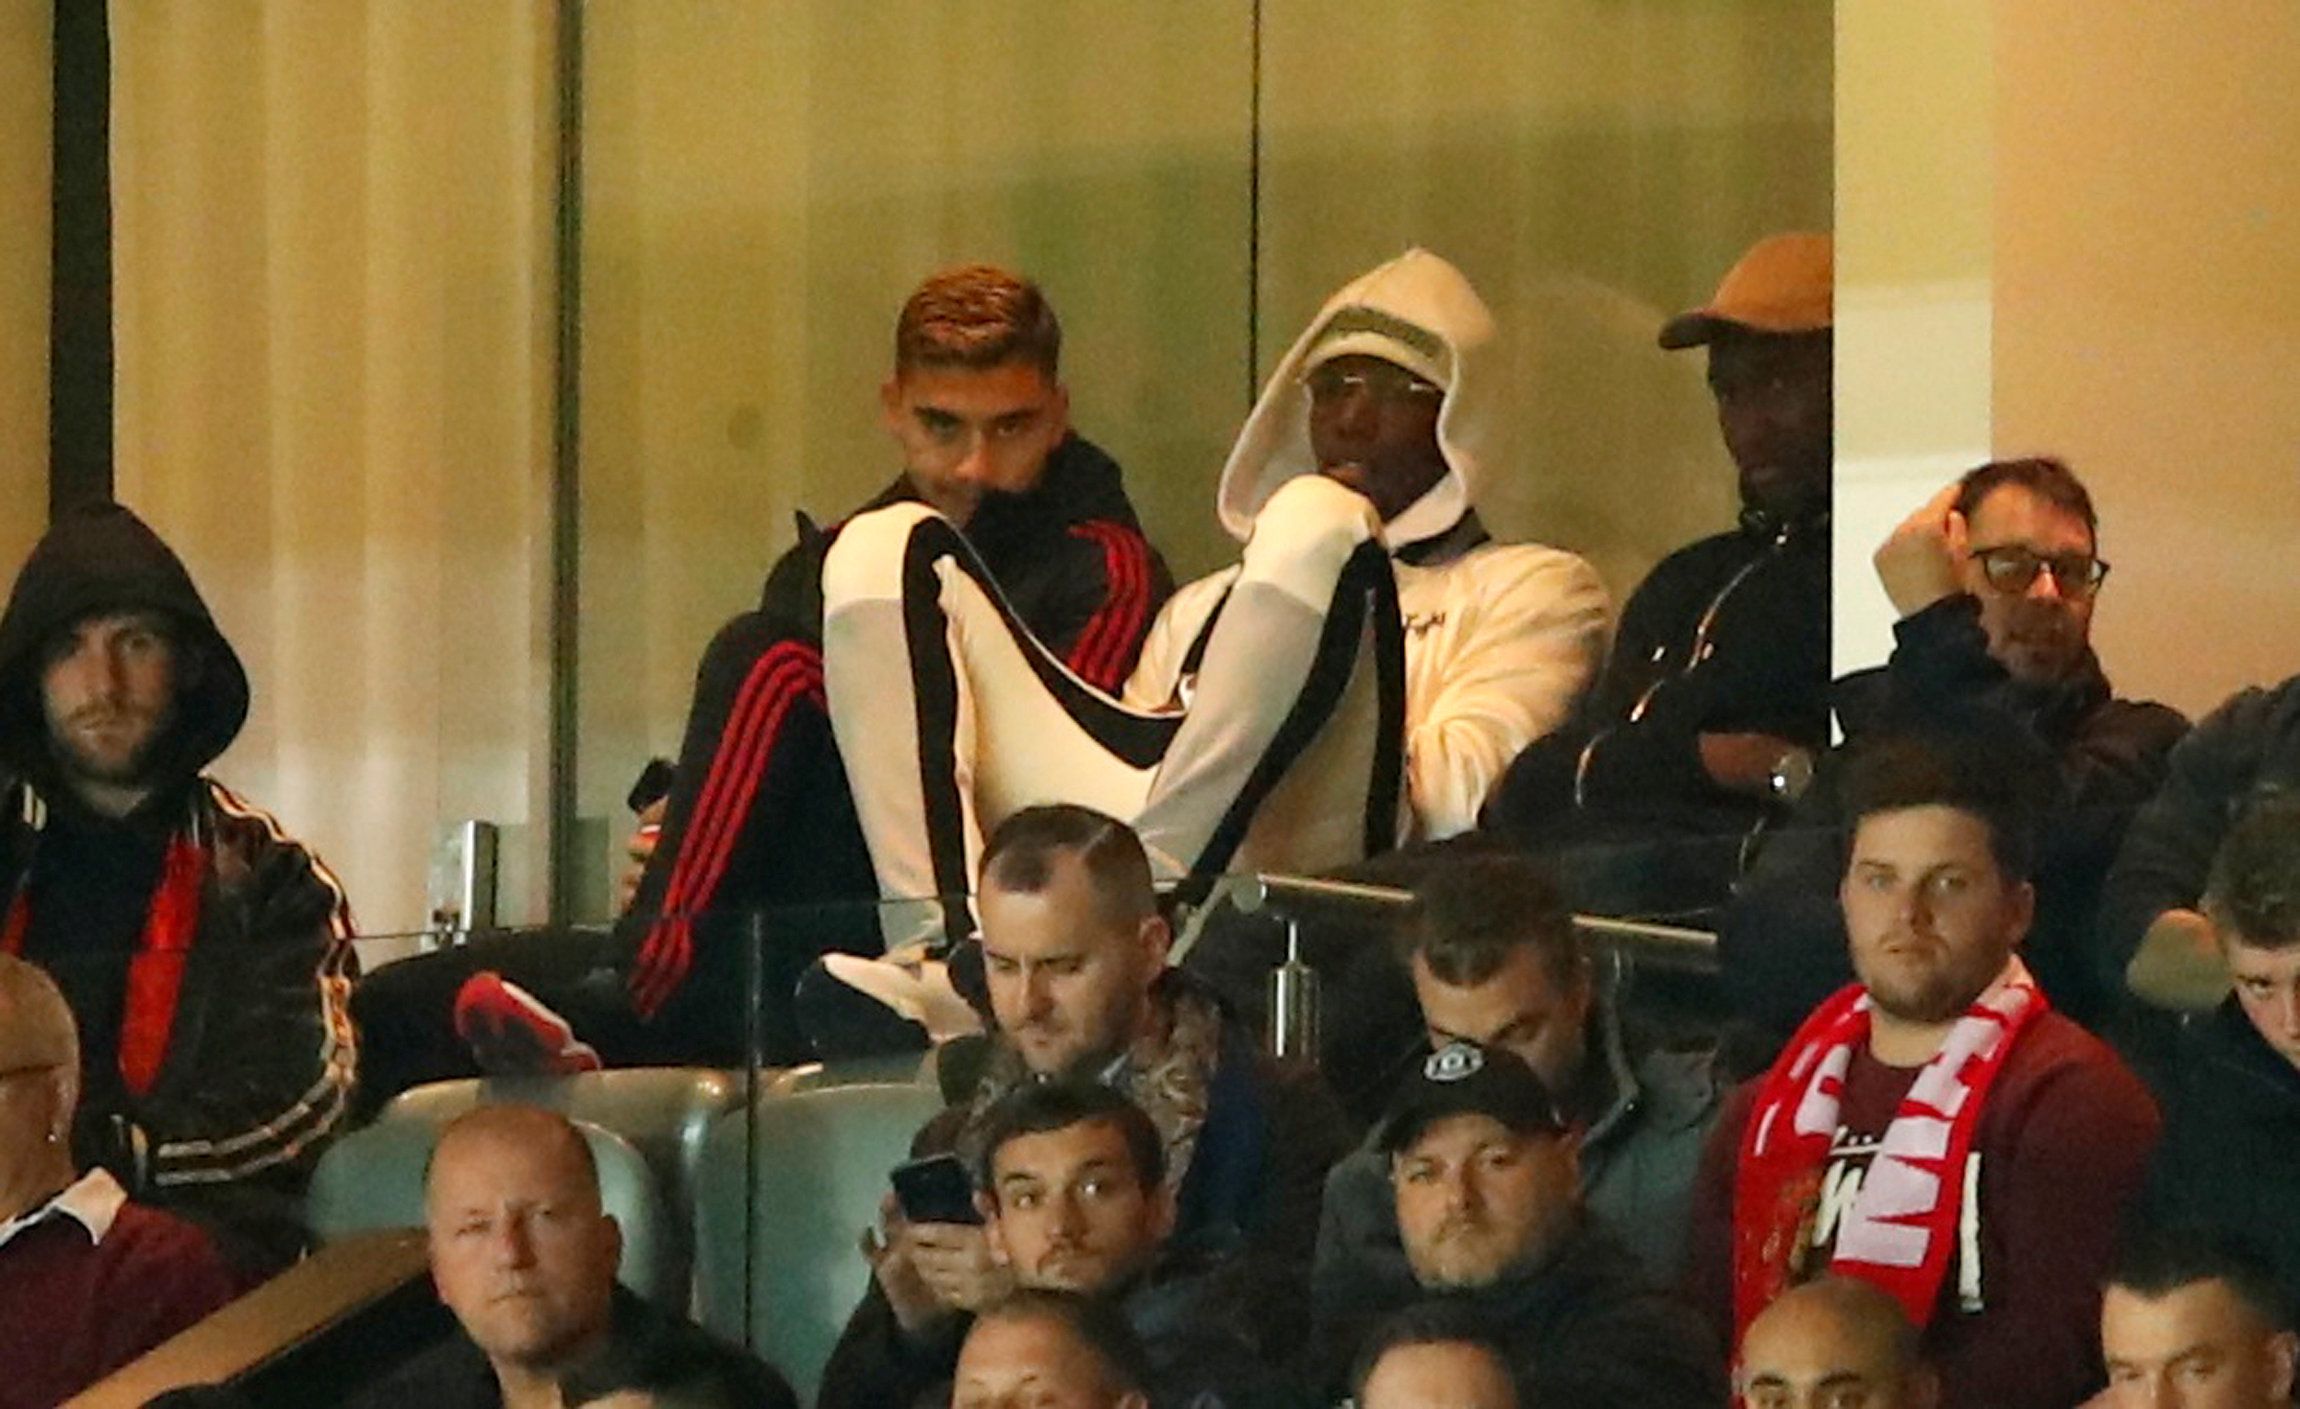 Soccer Football - Carabao Cup - Third Round - Manchester United v Derby County - Old Trafford, Manchester, Britain - September 25, 2018  Manchester United's Paul Pogba watches the match from the stands  Action Images via Reuters/Andrew Boyers  EDITORIAL USE ONLY. No use with unauthorized audio, video, data, fixture lists, club/league logos or 